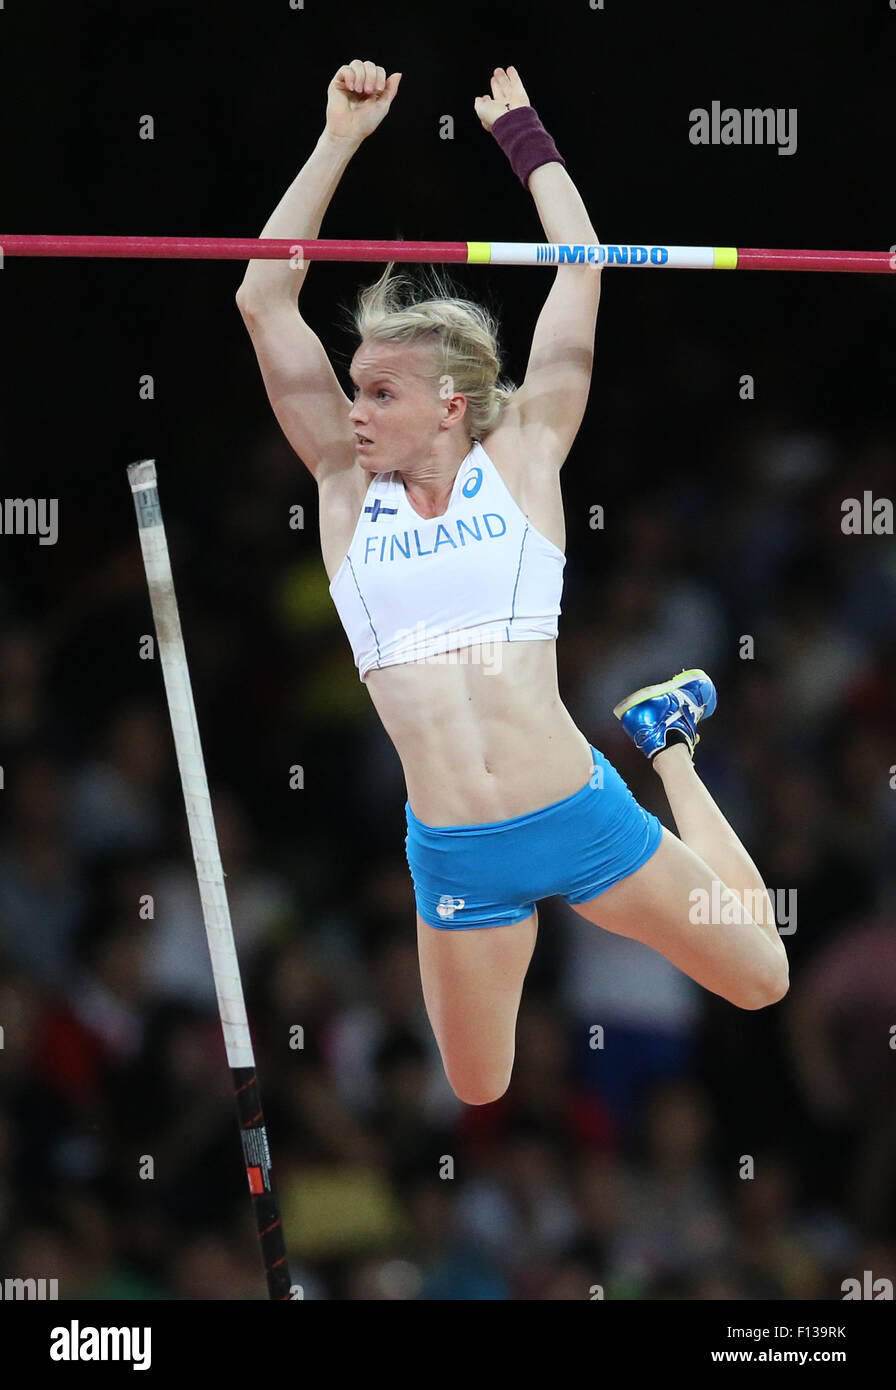 Beijing, China. 26th Aug, 2015. Minna Nikkanen of Finland in action during the women's Pole Vault final of the Beijing 2015 IAAF World Championships at the National Stadium, also known as Bird's Nest, in Beijing, China, 26 August 2015. Photo: Michael Kappeler/dpa/Alamy Live News Stock Photo